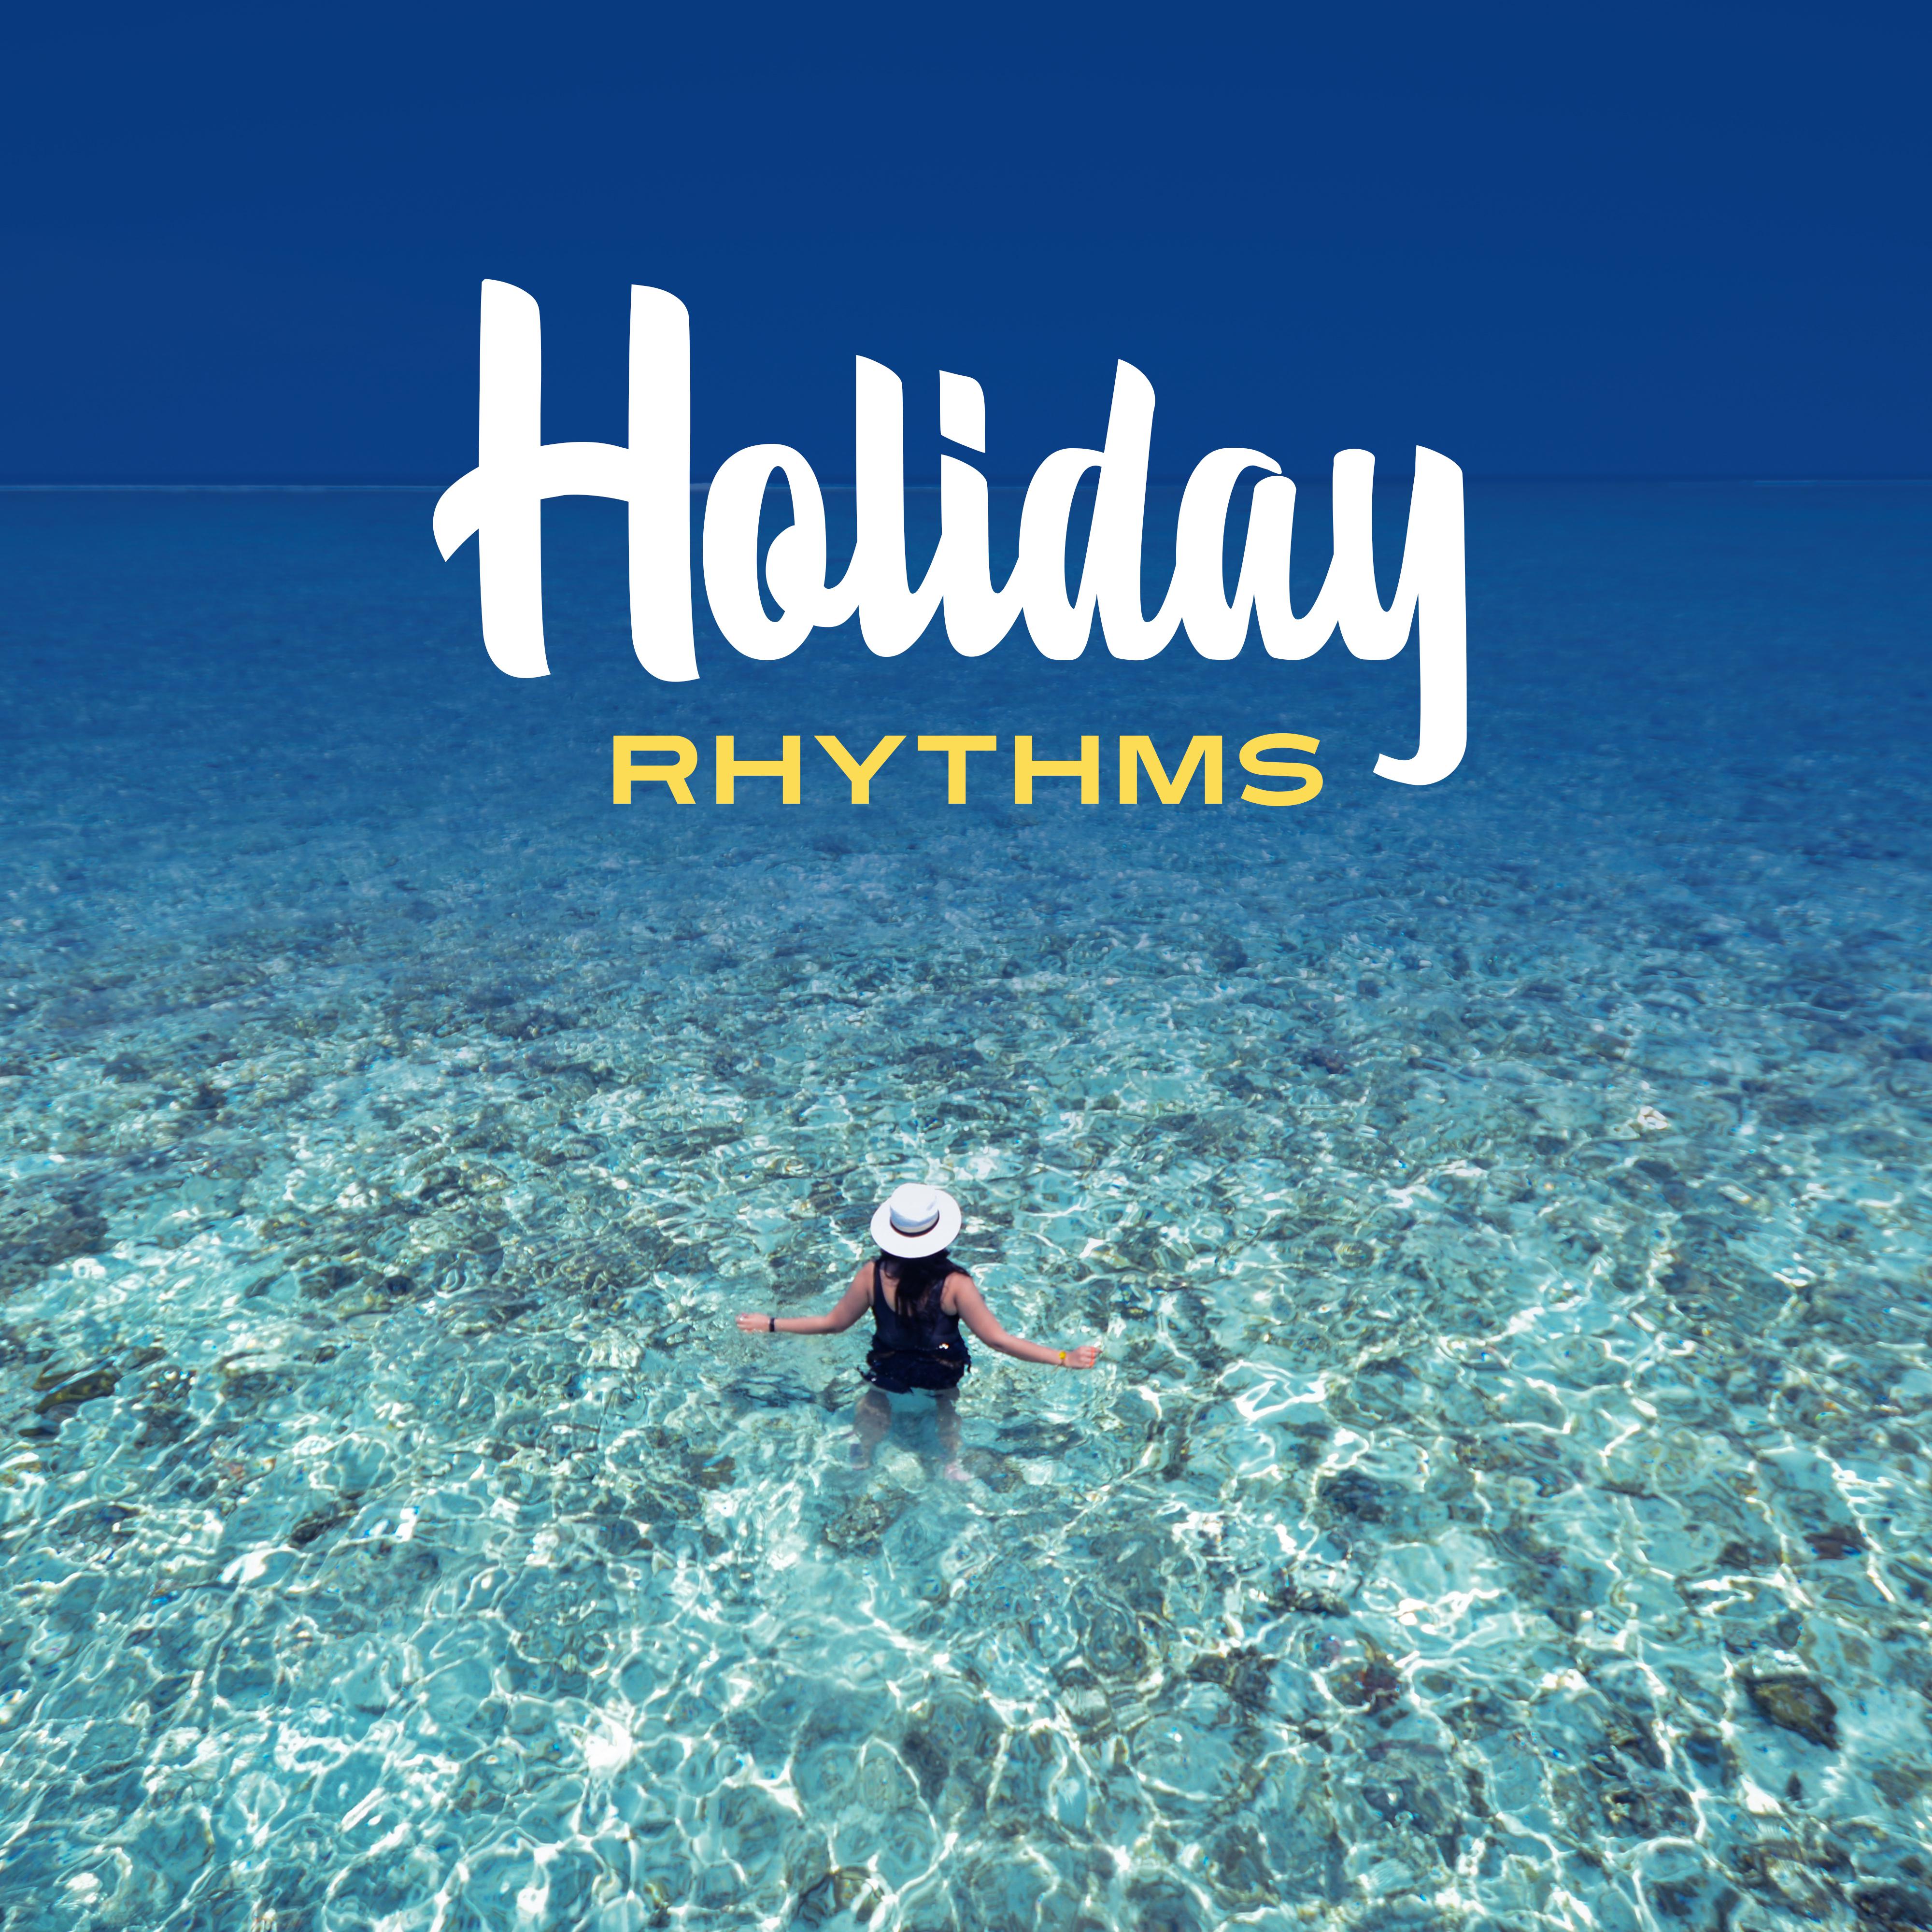 Holiday Rhythms – *** Music for Dance, Beach Party, Summer Chill Out, Dancefloor, Beach Bar, Cocktails & Drinks, Electronic Beats